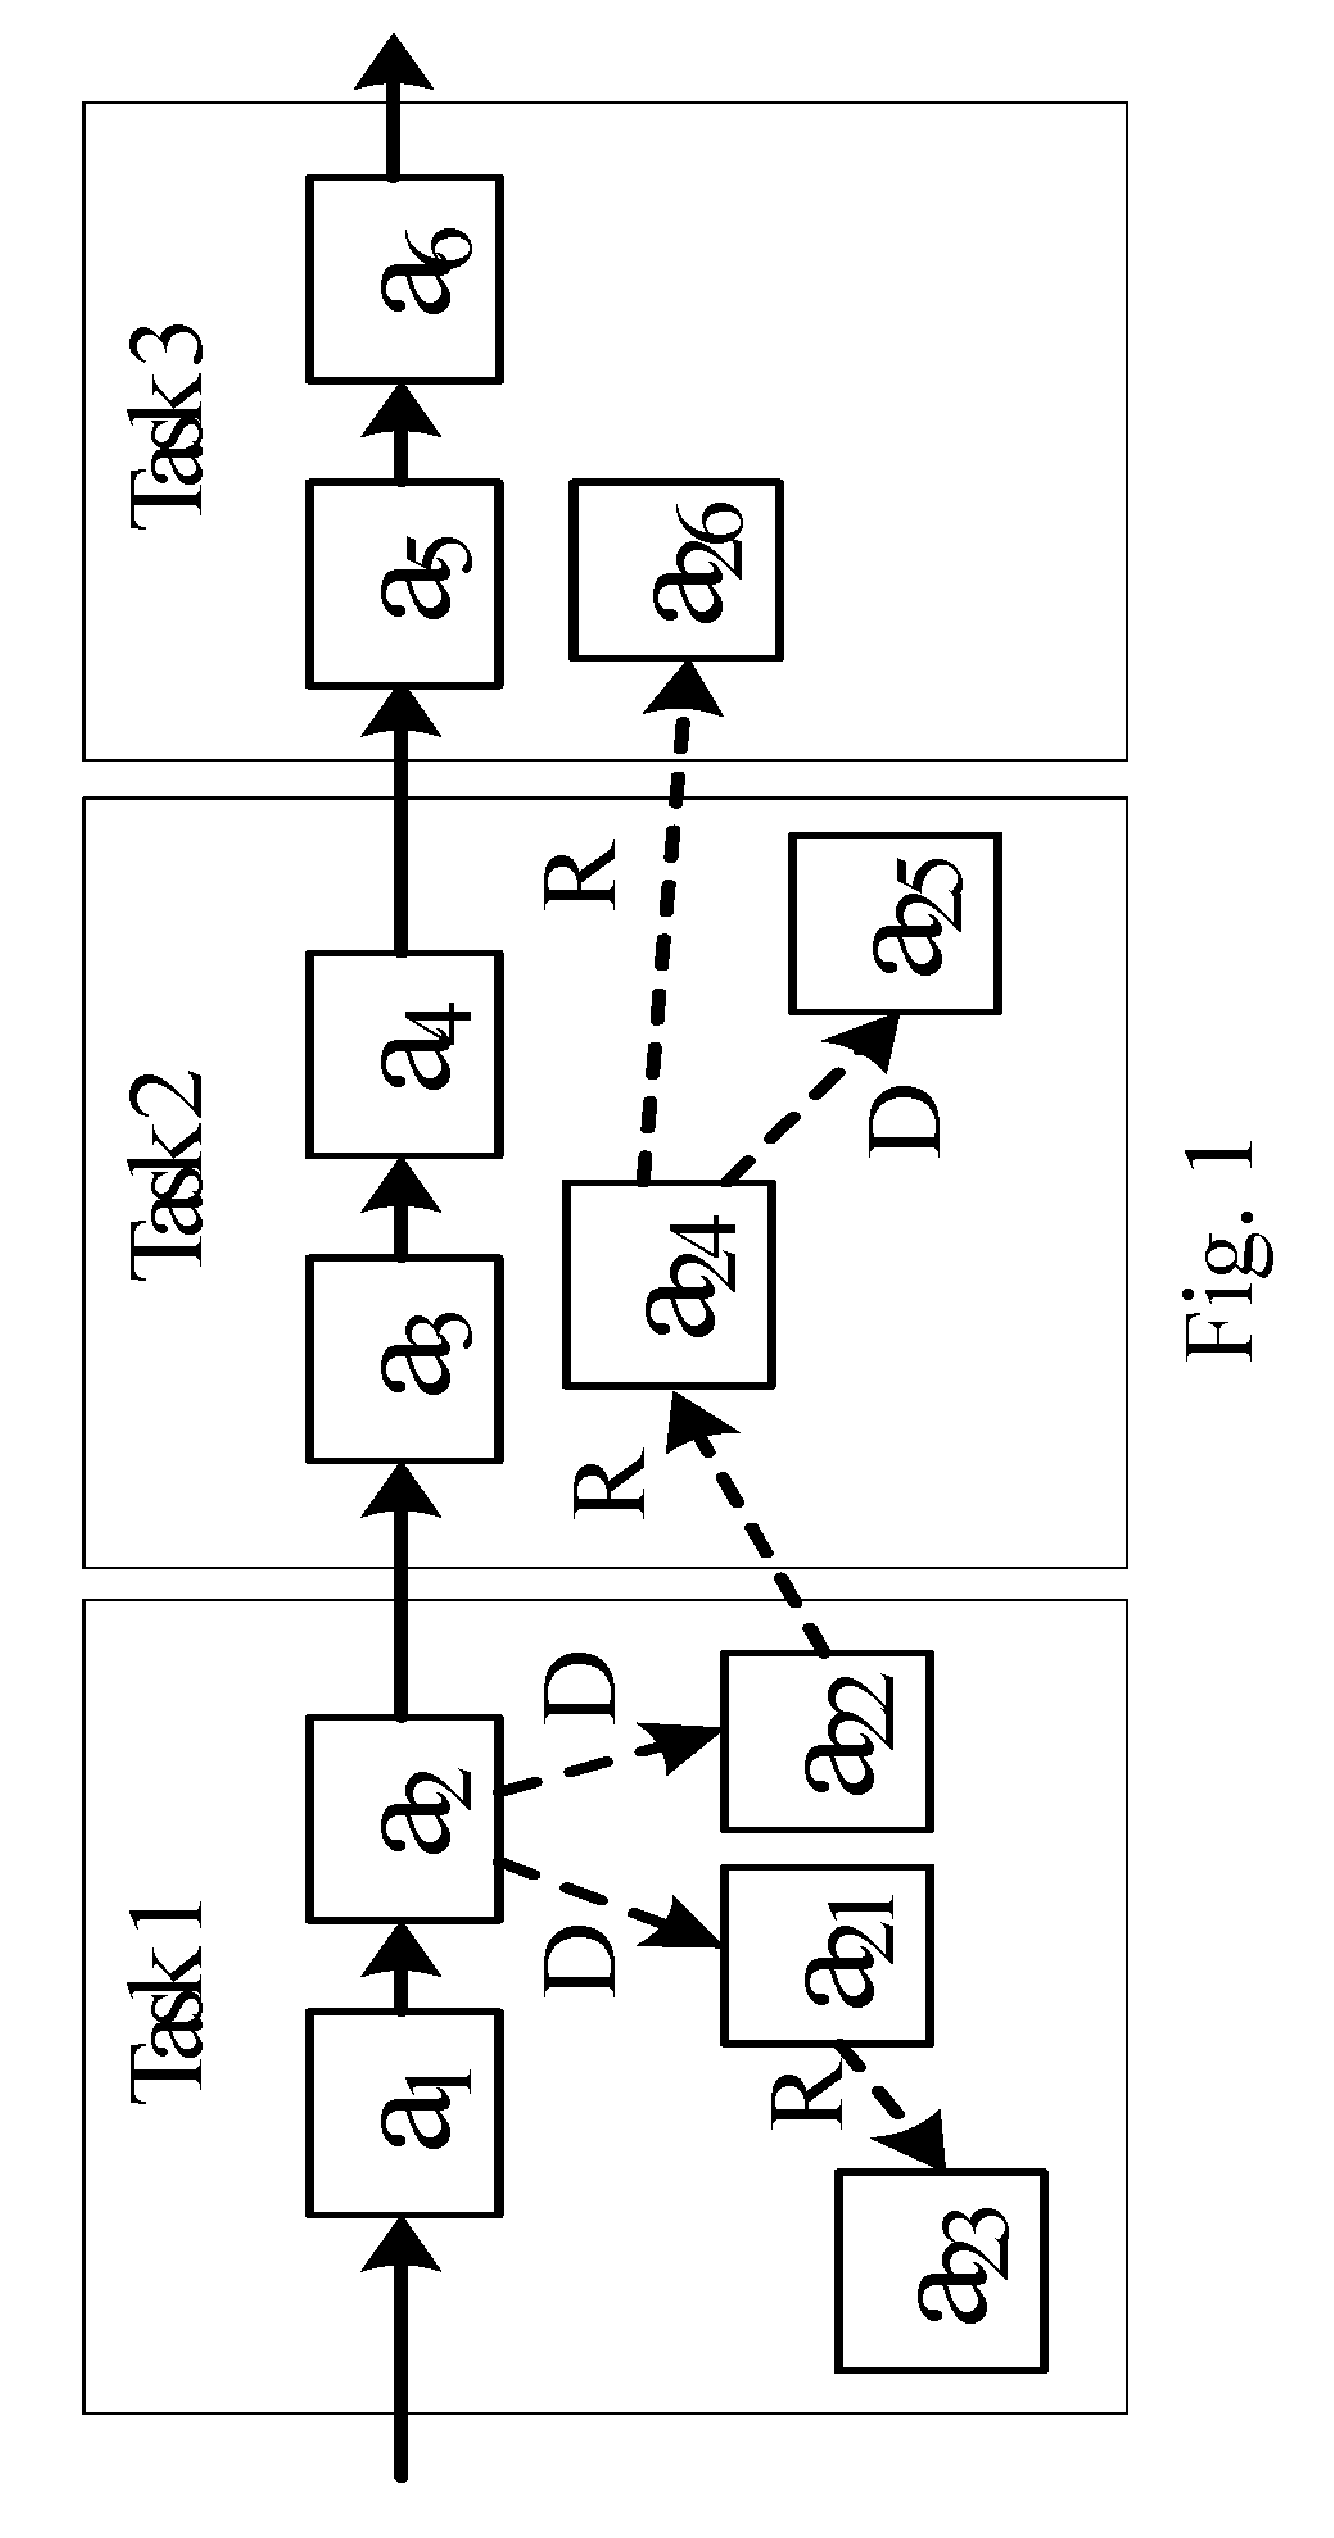 Action-based in-process software defect prediction software defect prediction techniques based on software development activities